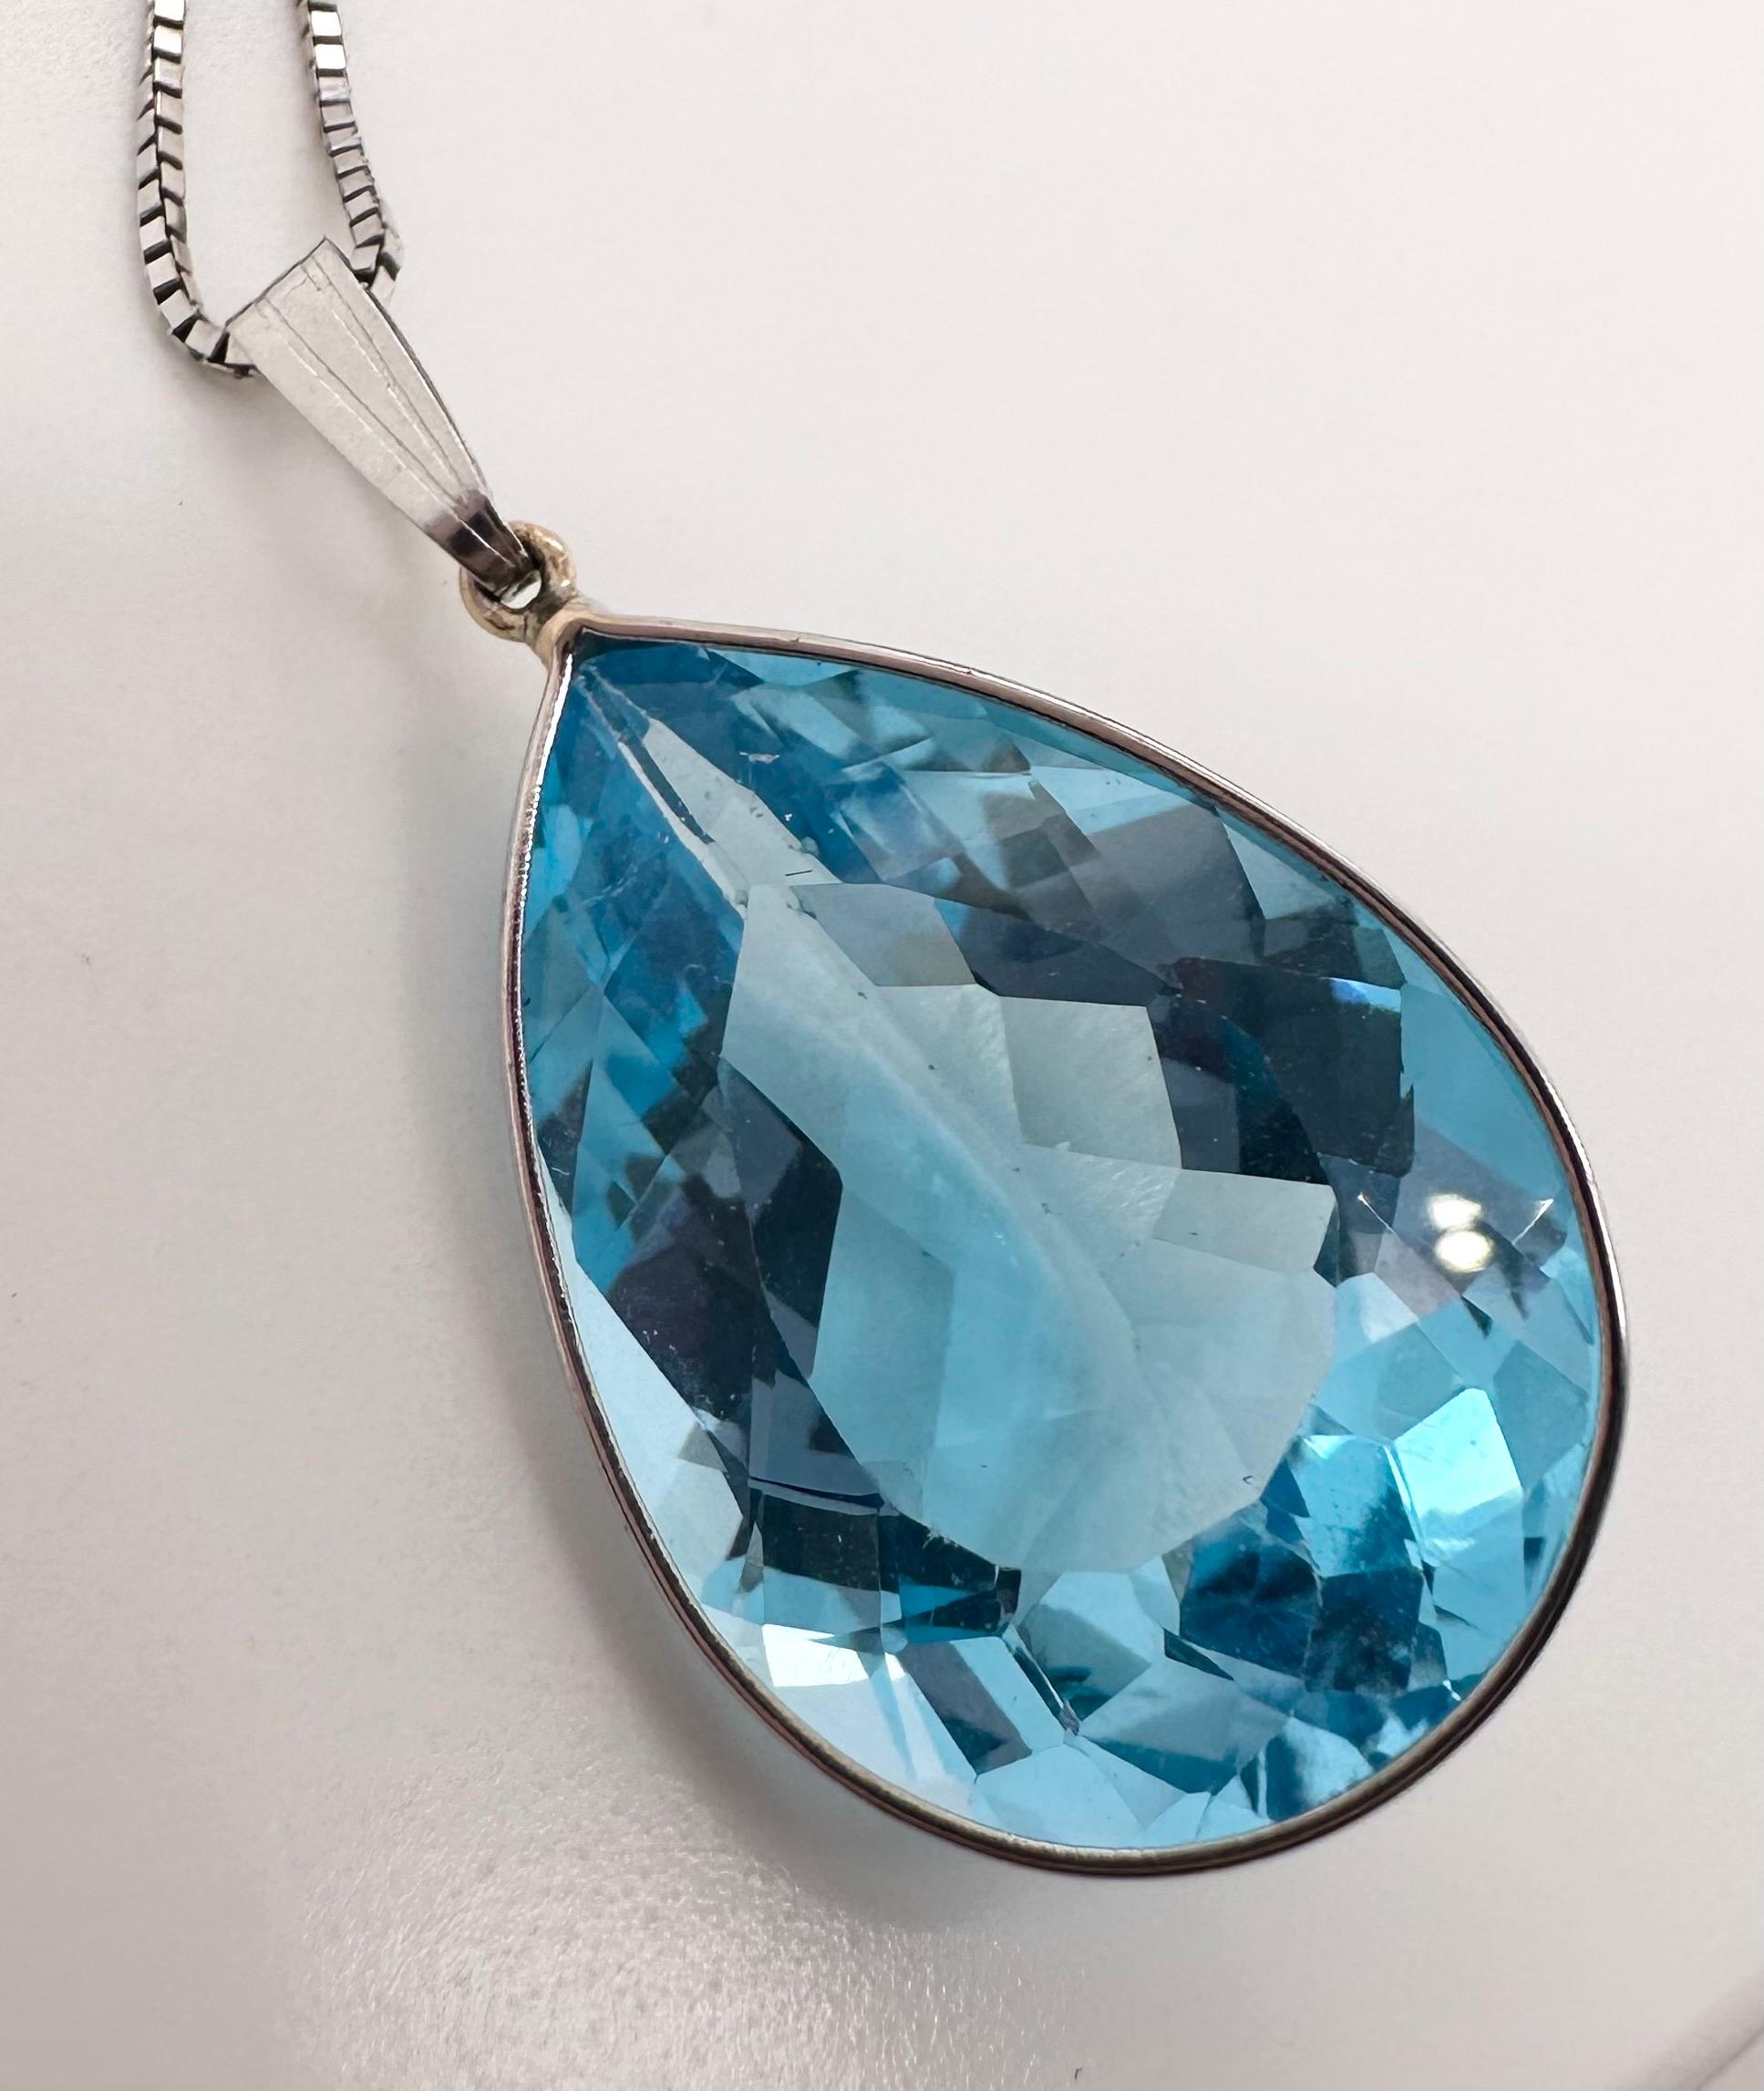 Modern and simple blue topaz pear shape pendant necklace, the pear topaz is large at 25 carats and 12x10mm size.
Item will come with a box, certificate of authenticity.

Metal: 14KT white gold
Carat: 25ct total
Center Stone: Certified Topaz
Color: